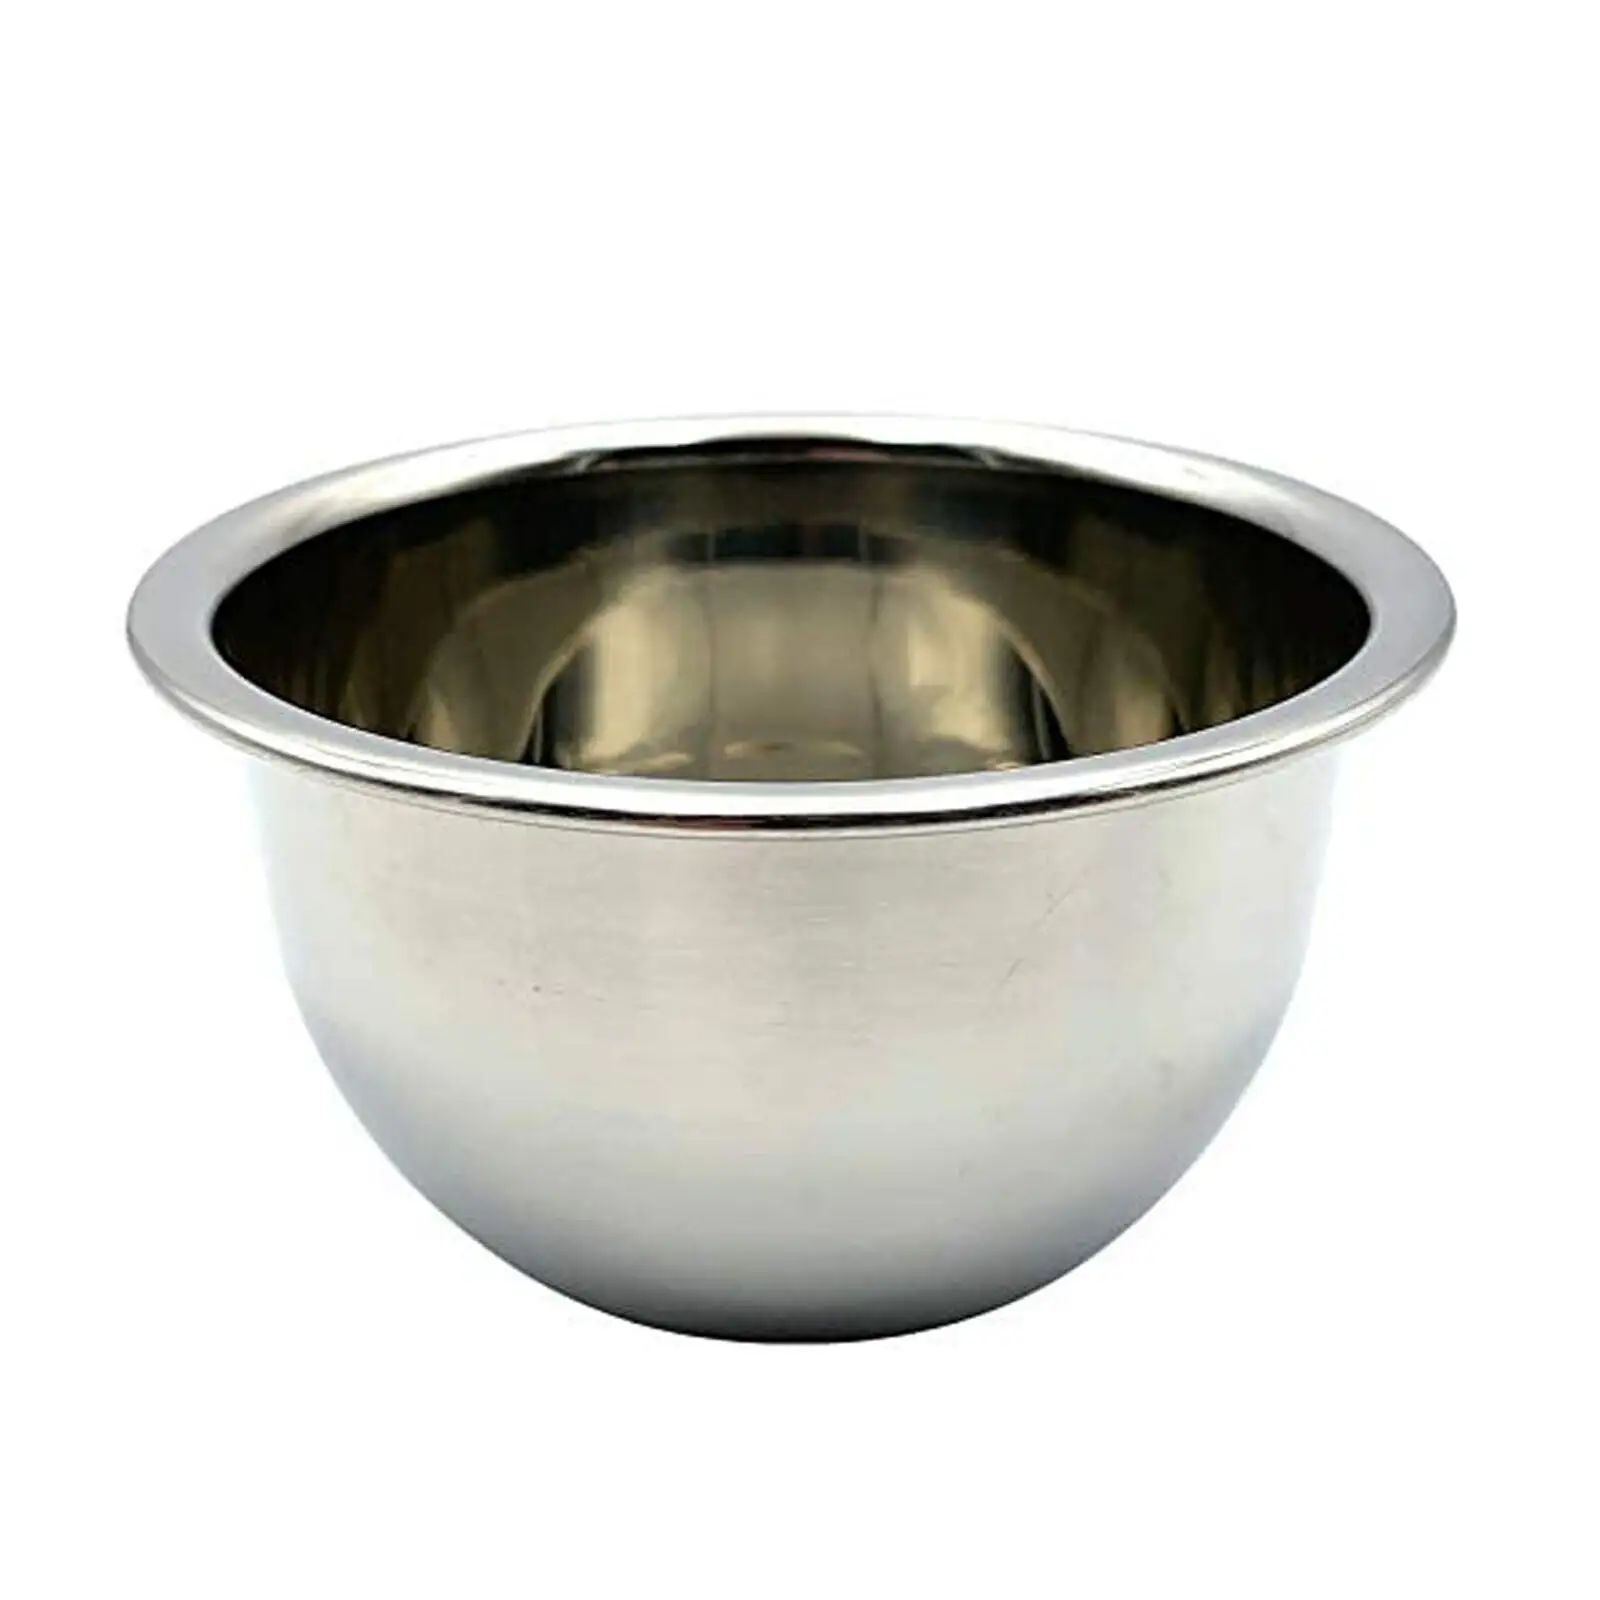 Stainless Steel Surgical Bowl 80 mm OR Grade Surgical Instrument